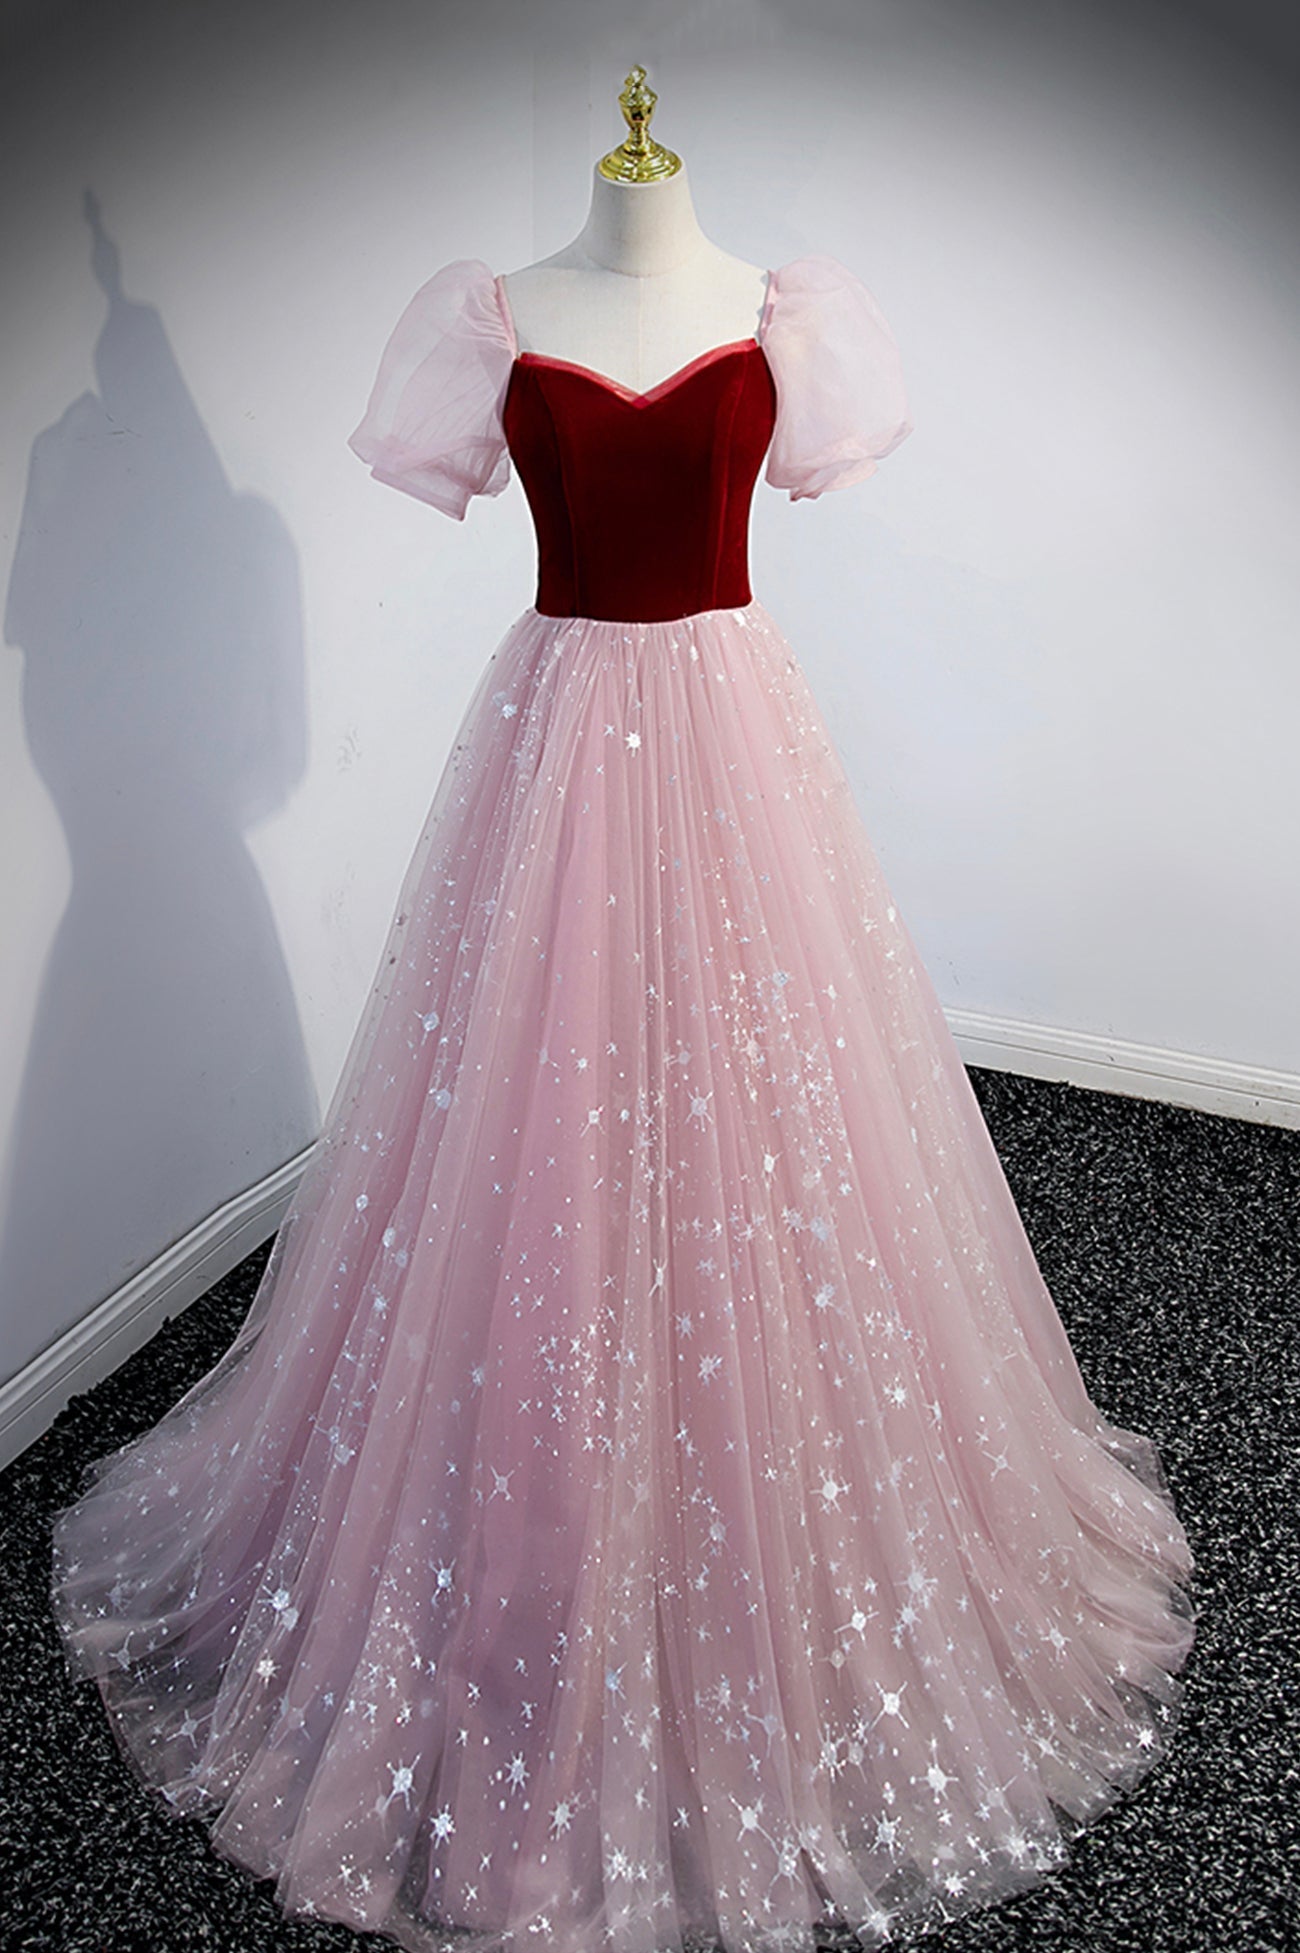 Pink Tulle Long A-Line Prom Dress Outfits For Girls, Lovely Short Sleeve Evening Party Dress